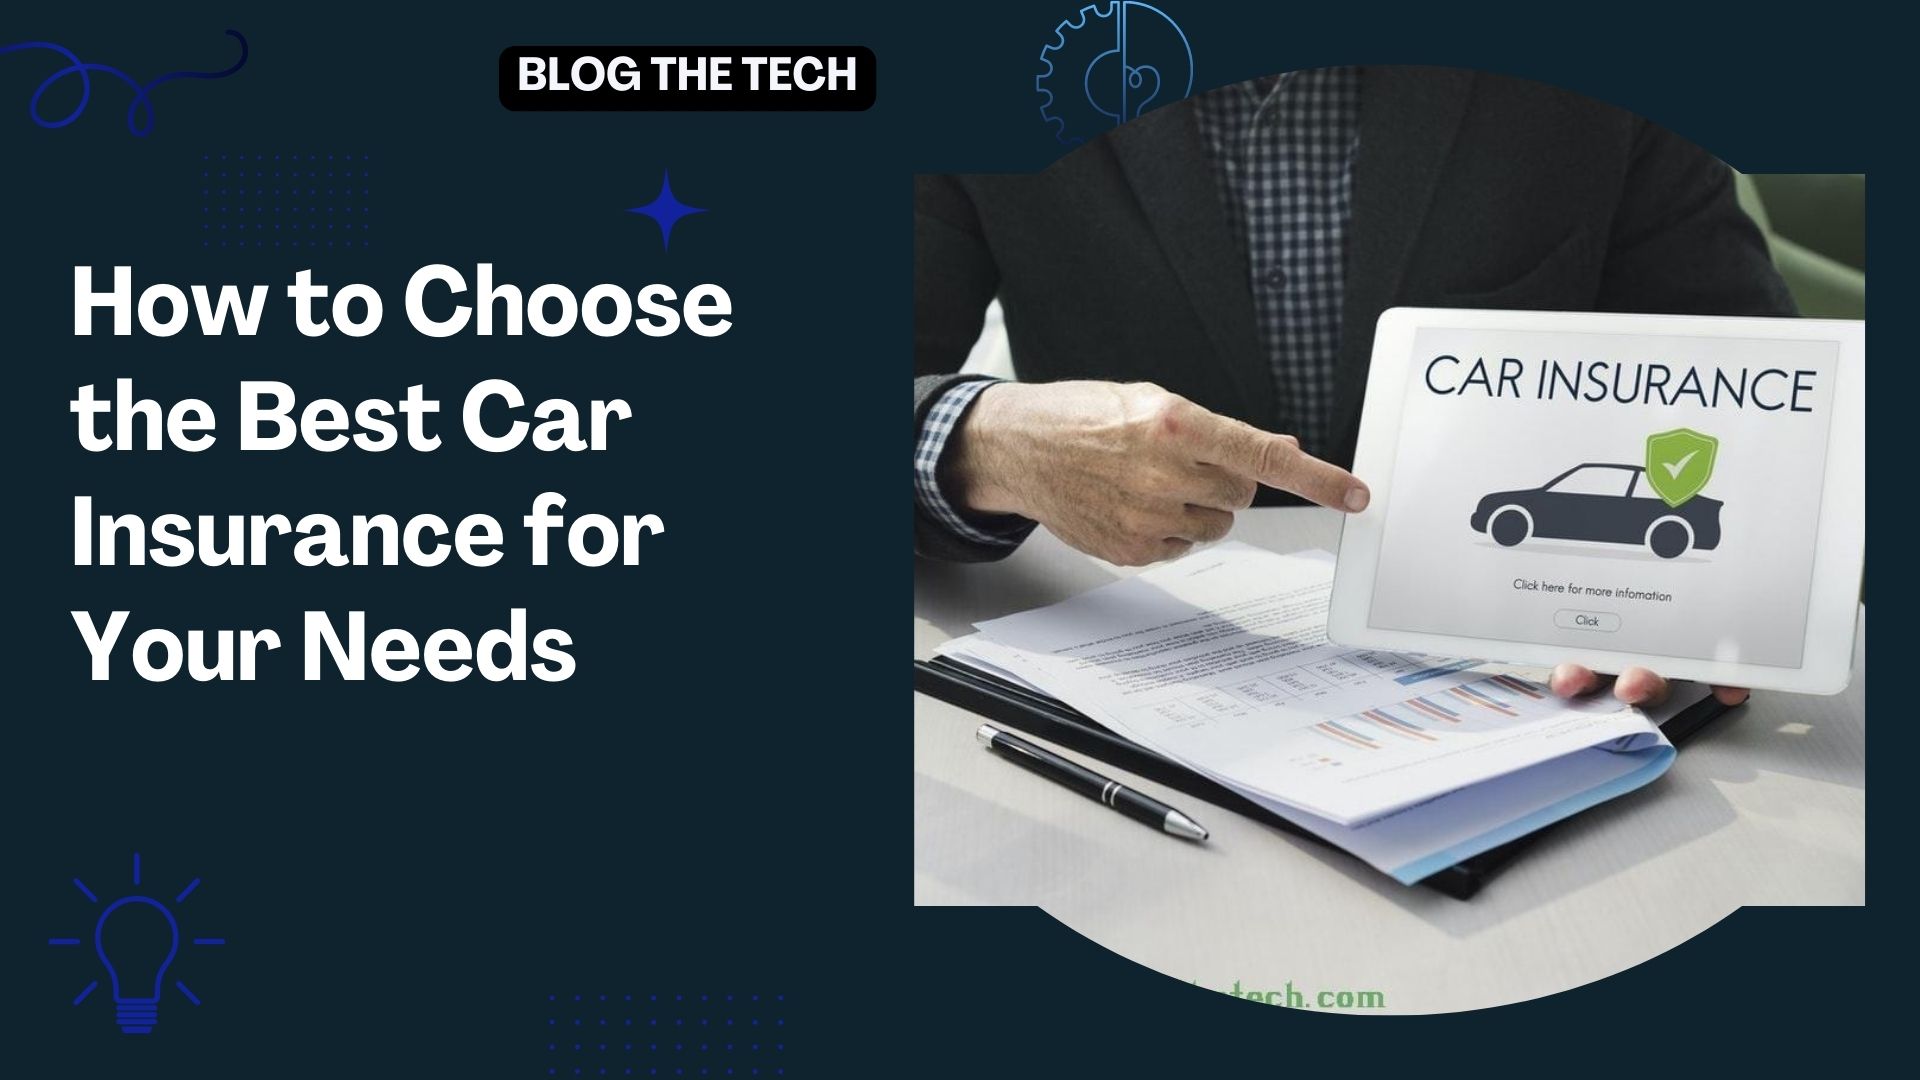 How to Choose the Best Car Insurance for Your Needs